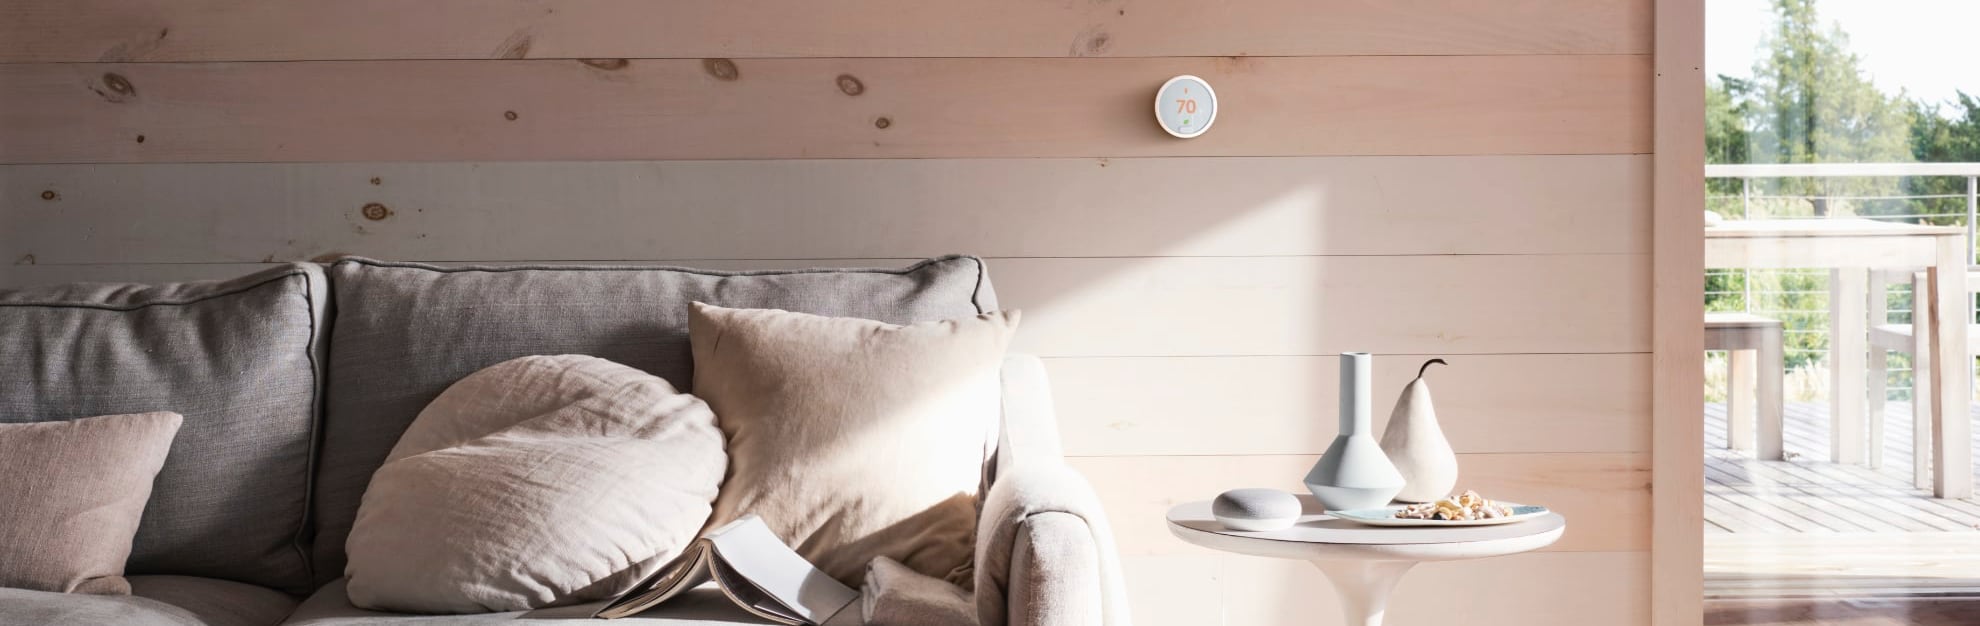 Vivint Home Automation in Minneapolis